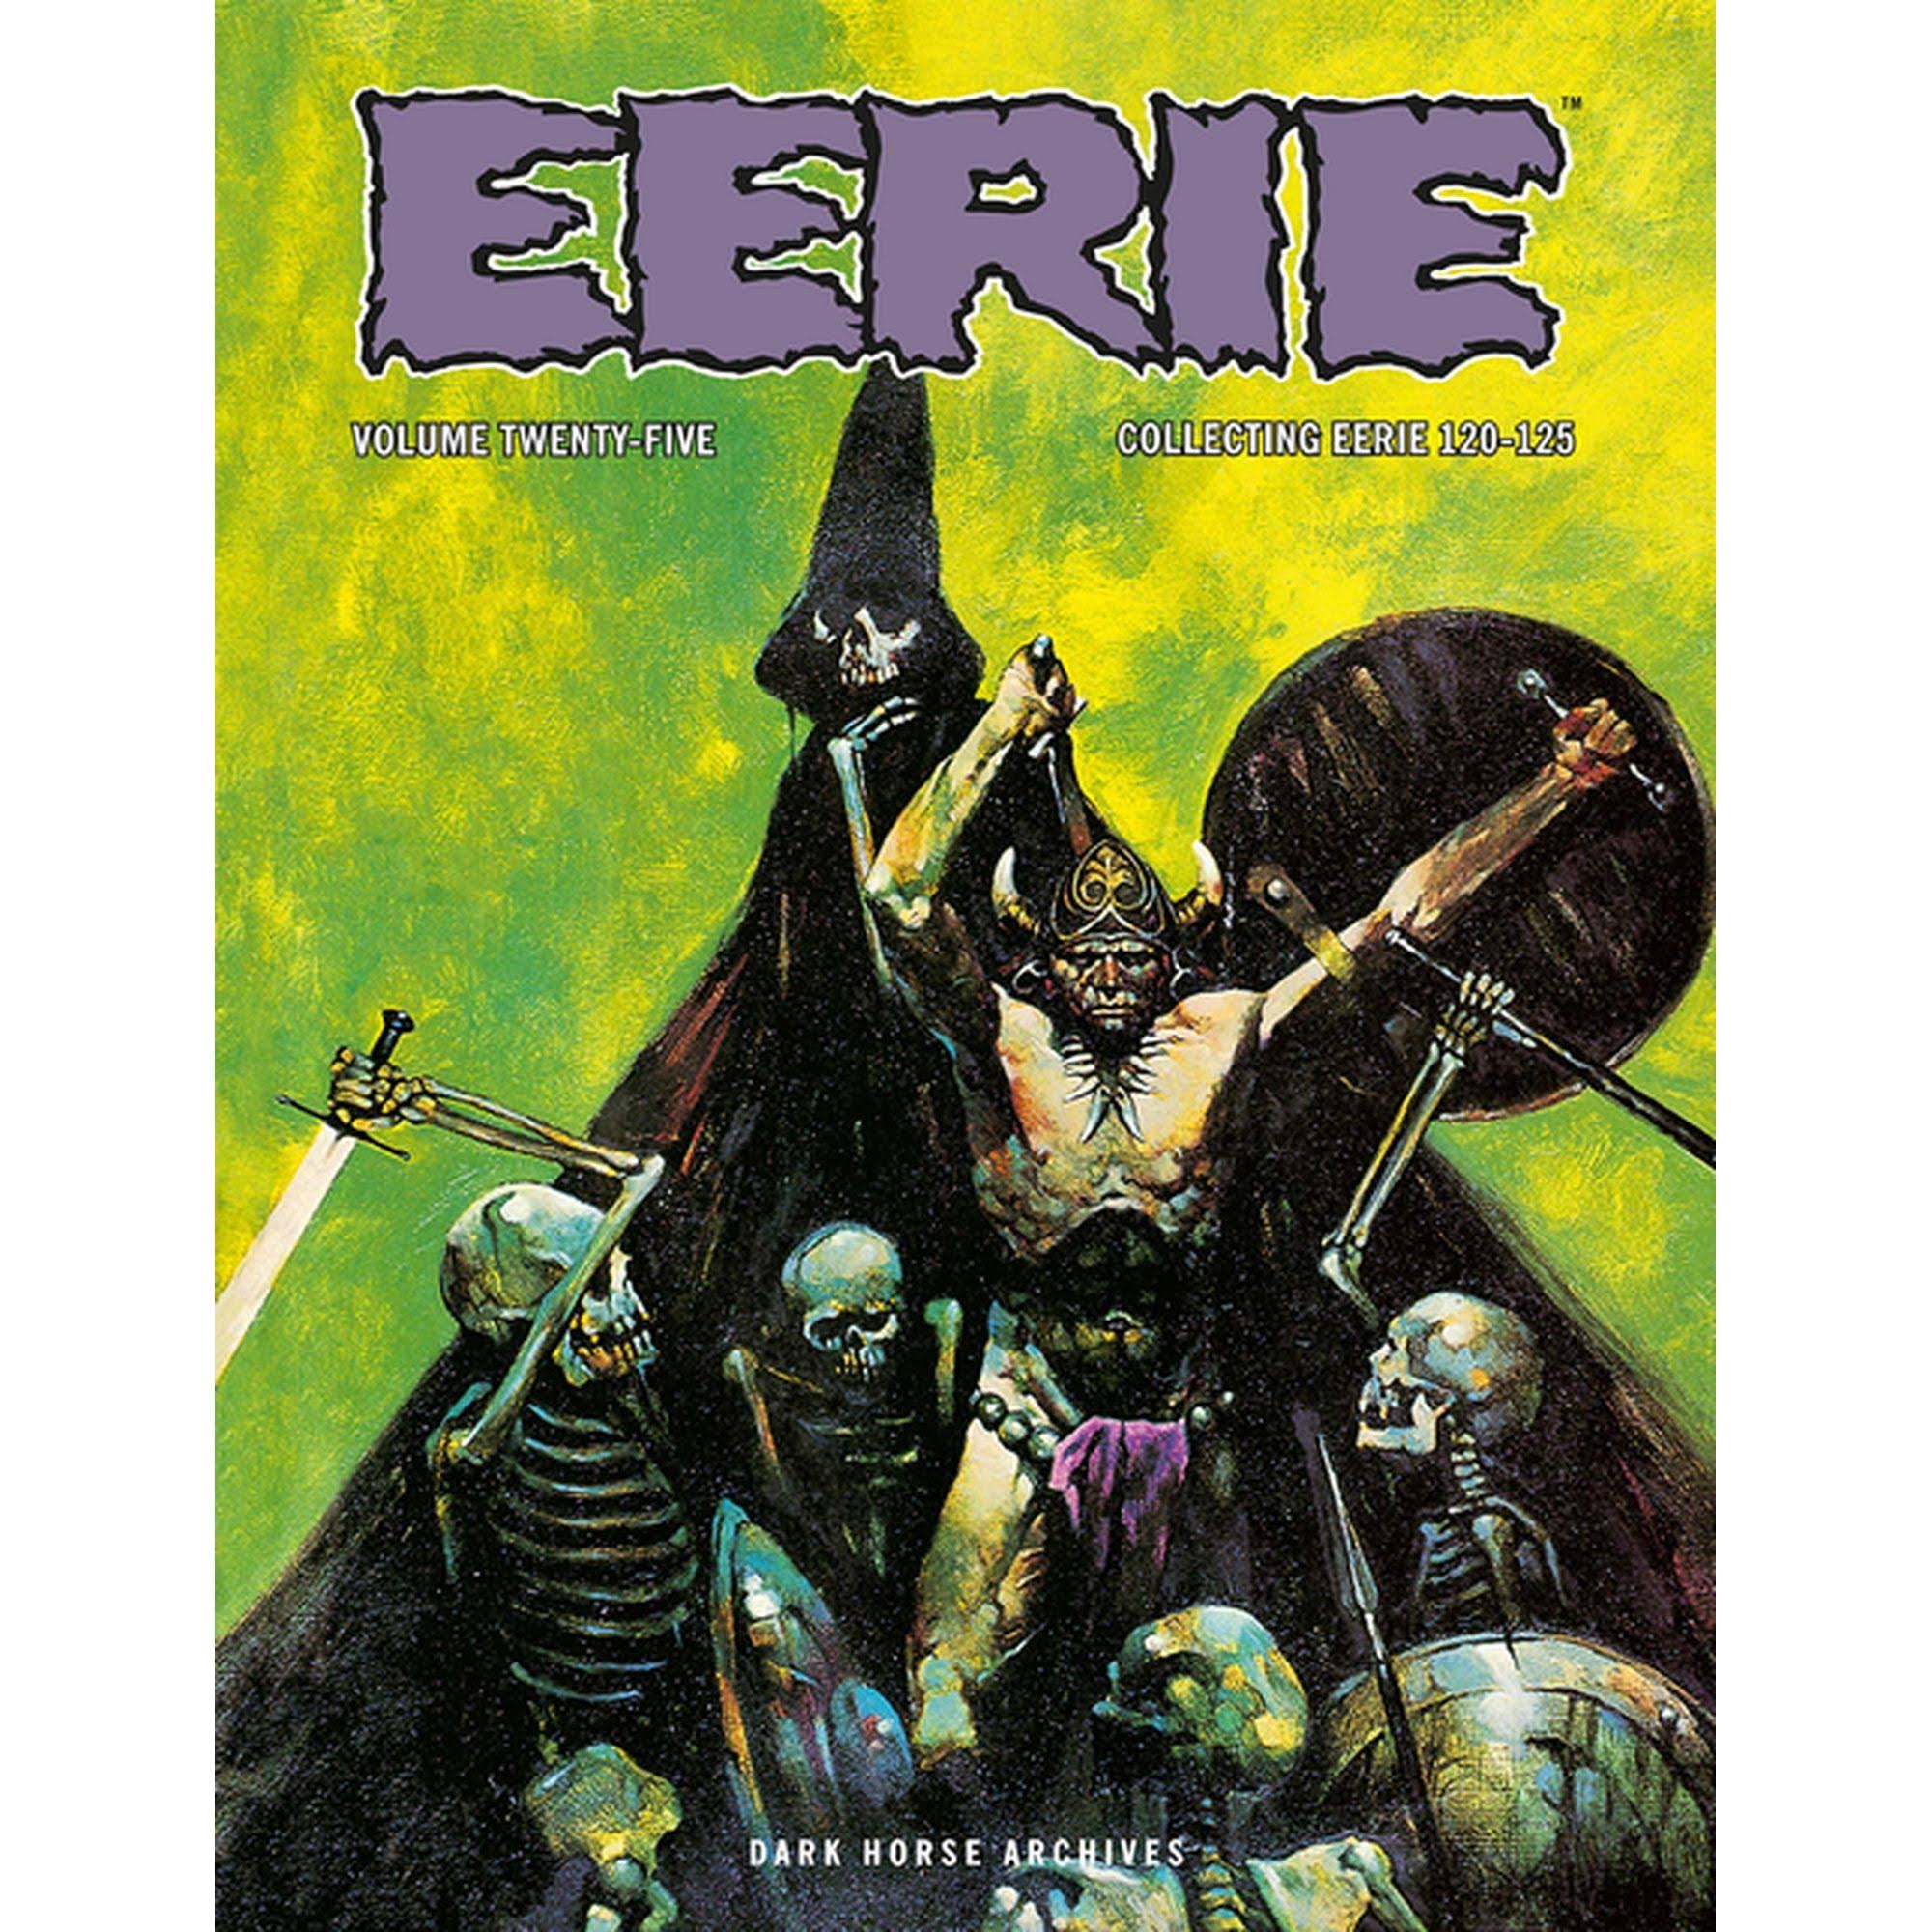 Eerie Archives [Book]